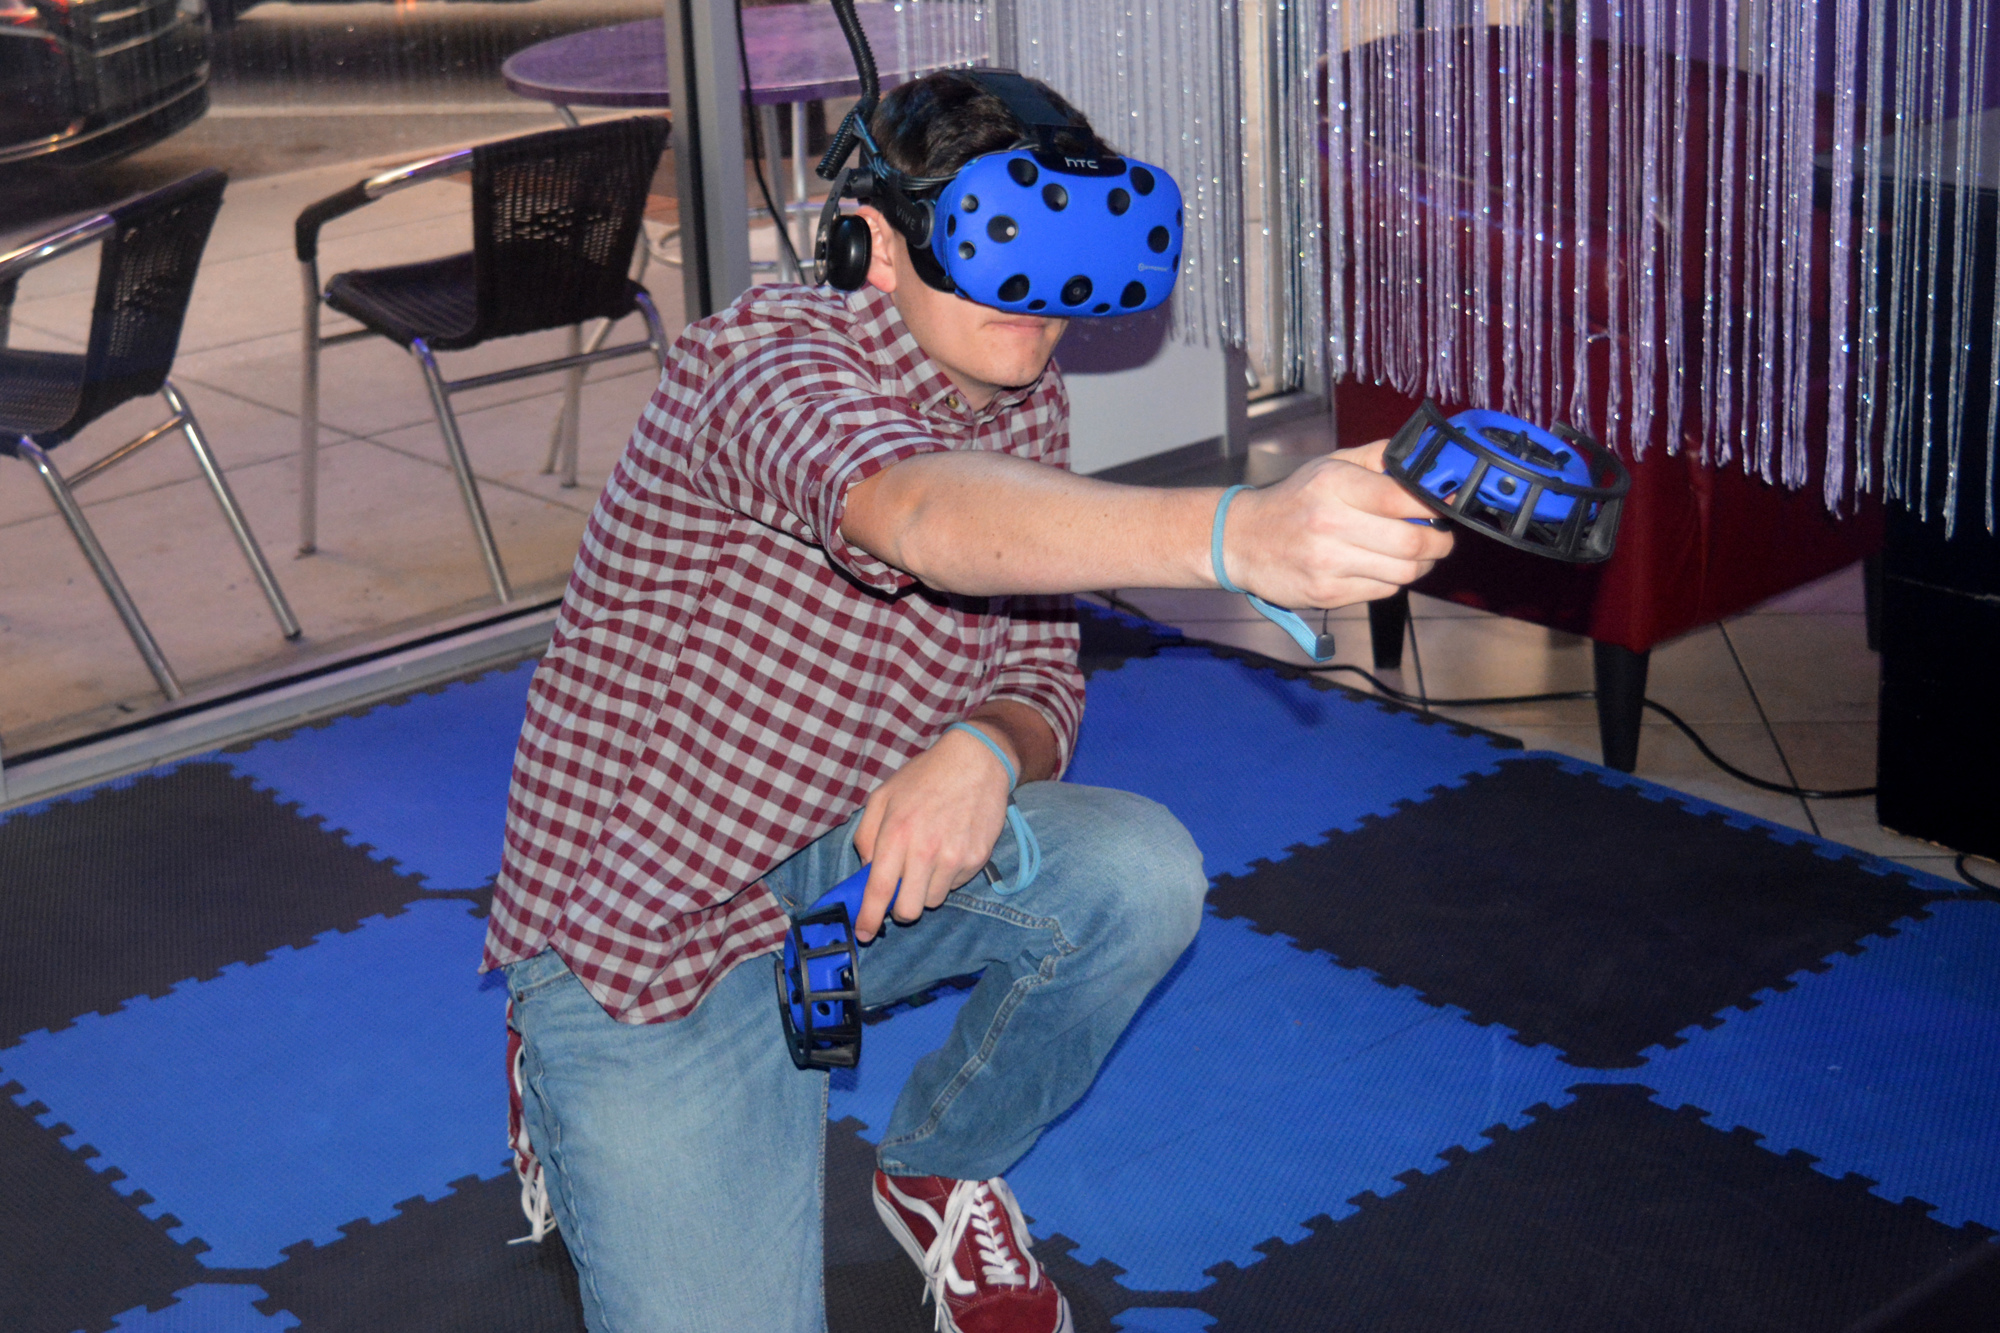 Michael Durham plays tests out the HTC Vive virtual reality headsets at Mysterium Escape Rooms and VR — previous called Escape Reality Downtown — in 2019.